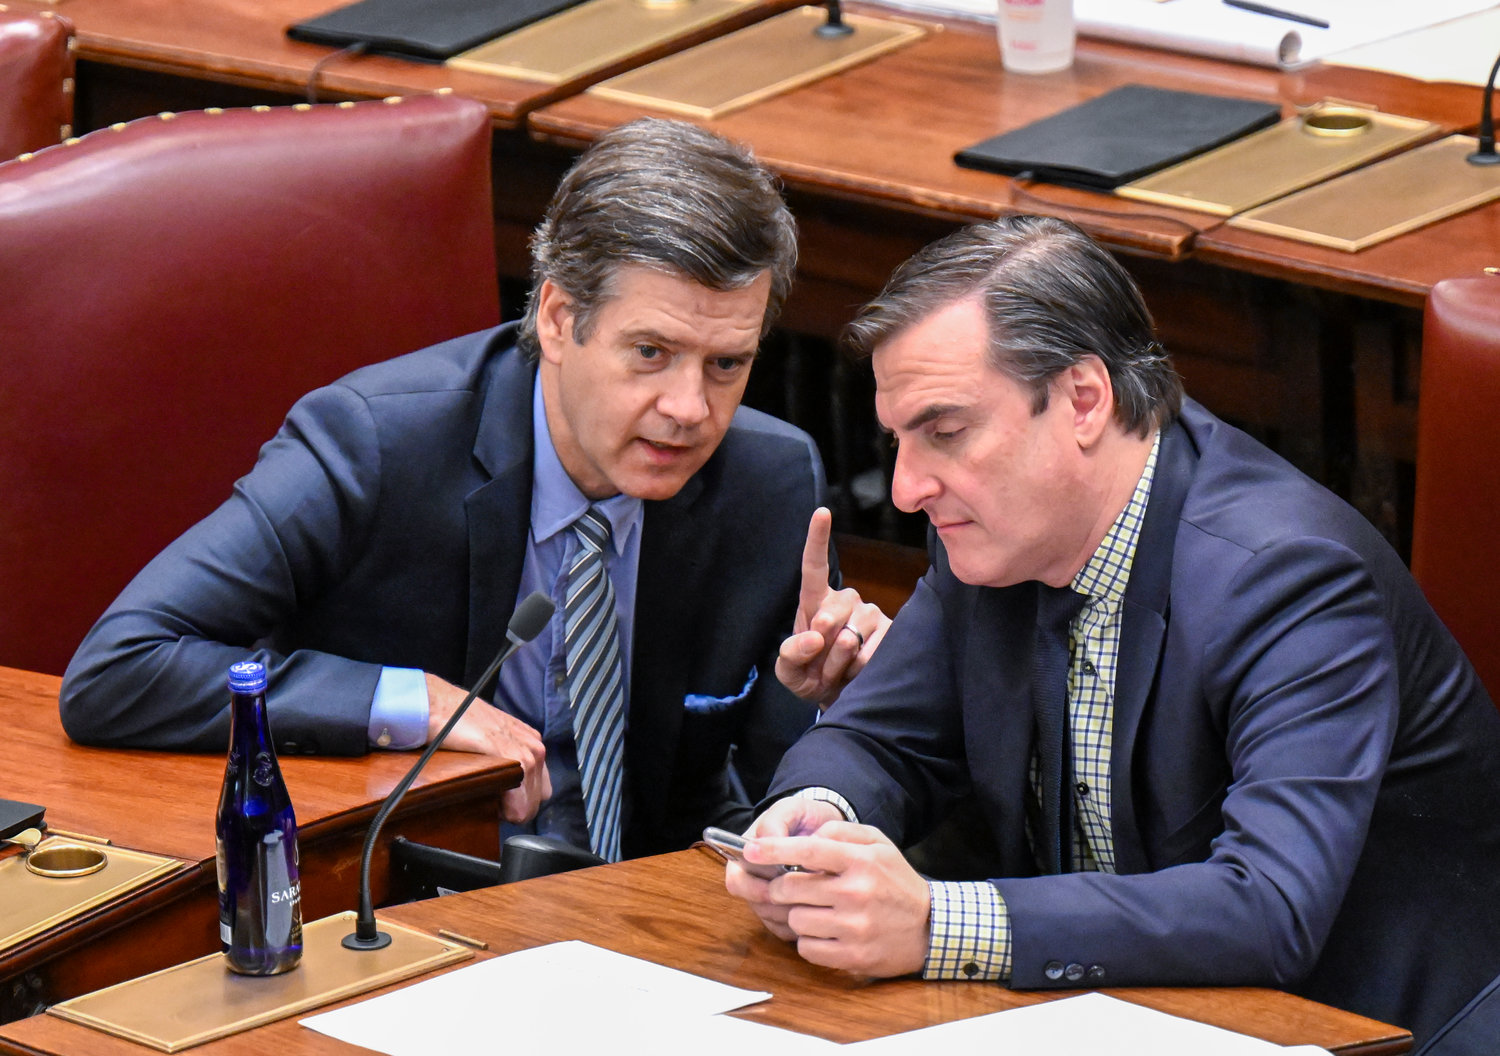 State Sen. Brad Hoylman, D-New York, left and Senate Deputy Majority Leader, Michael Gianaris, D-Astoria, talk during a legislative session in the Senate Chamber at the state Capitol, Friday, April 8, 2022, in Albany, N.Y. (AP Photo/Hans Pennink)